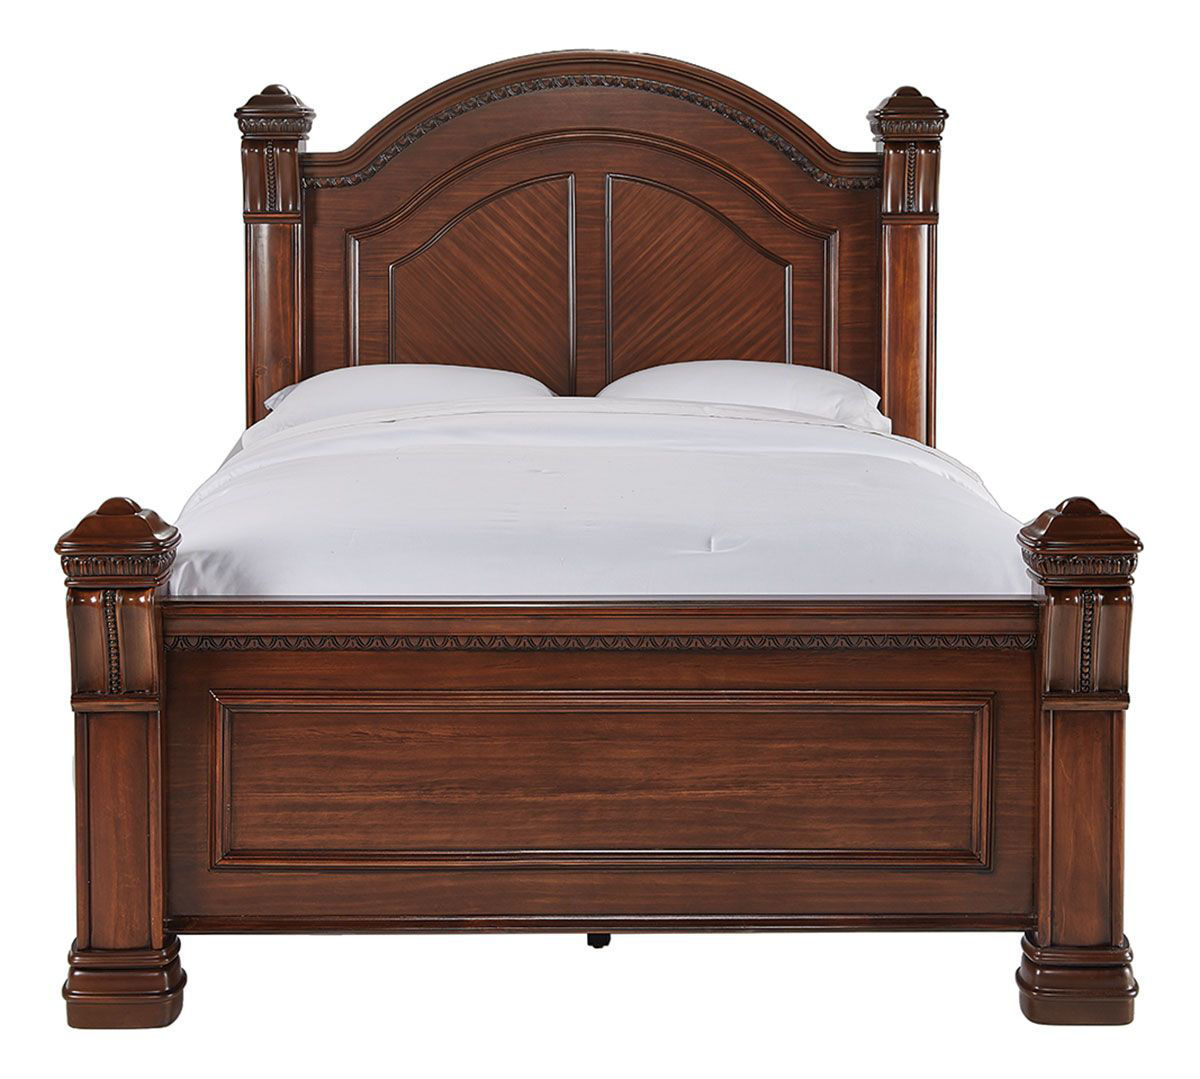 Belmont Complete King Bed Bad, Cherry King Headboard And Frame